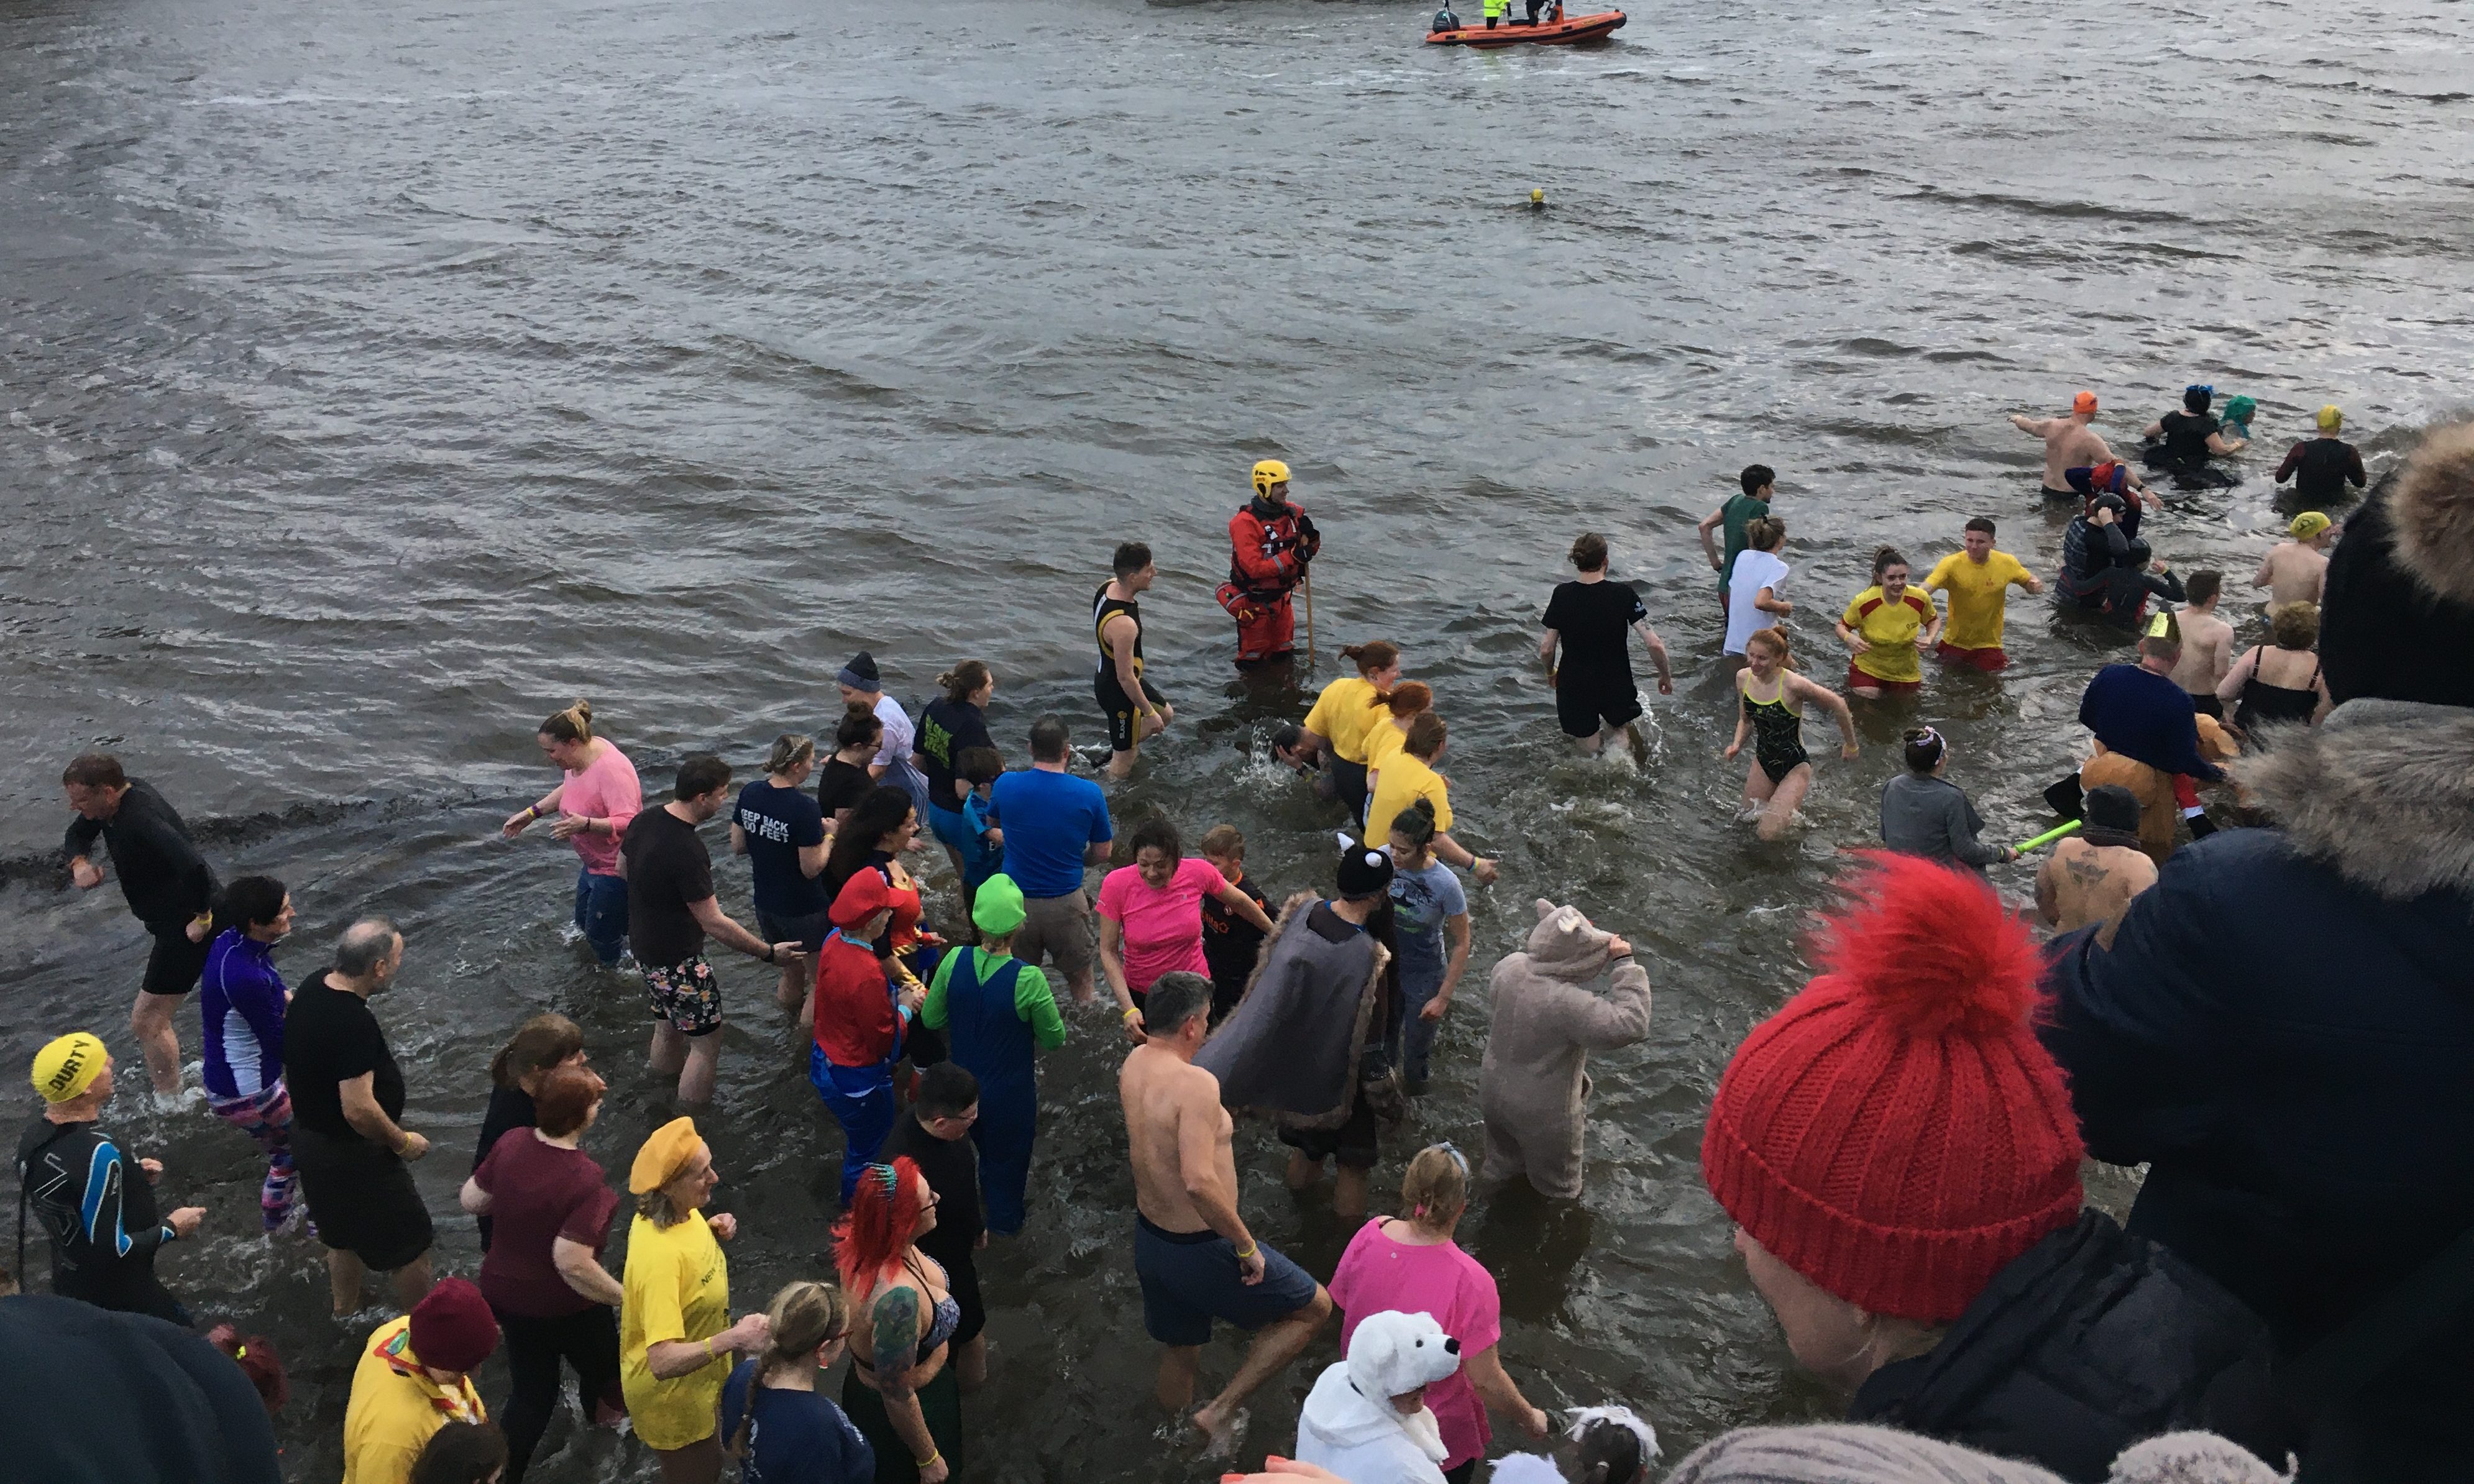 People brave the sea at the Broughty Ferry dook.